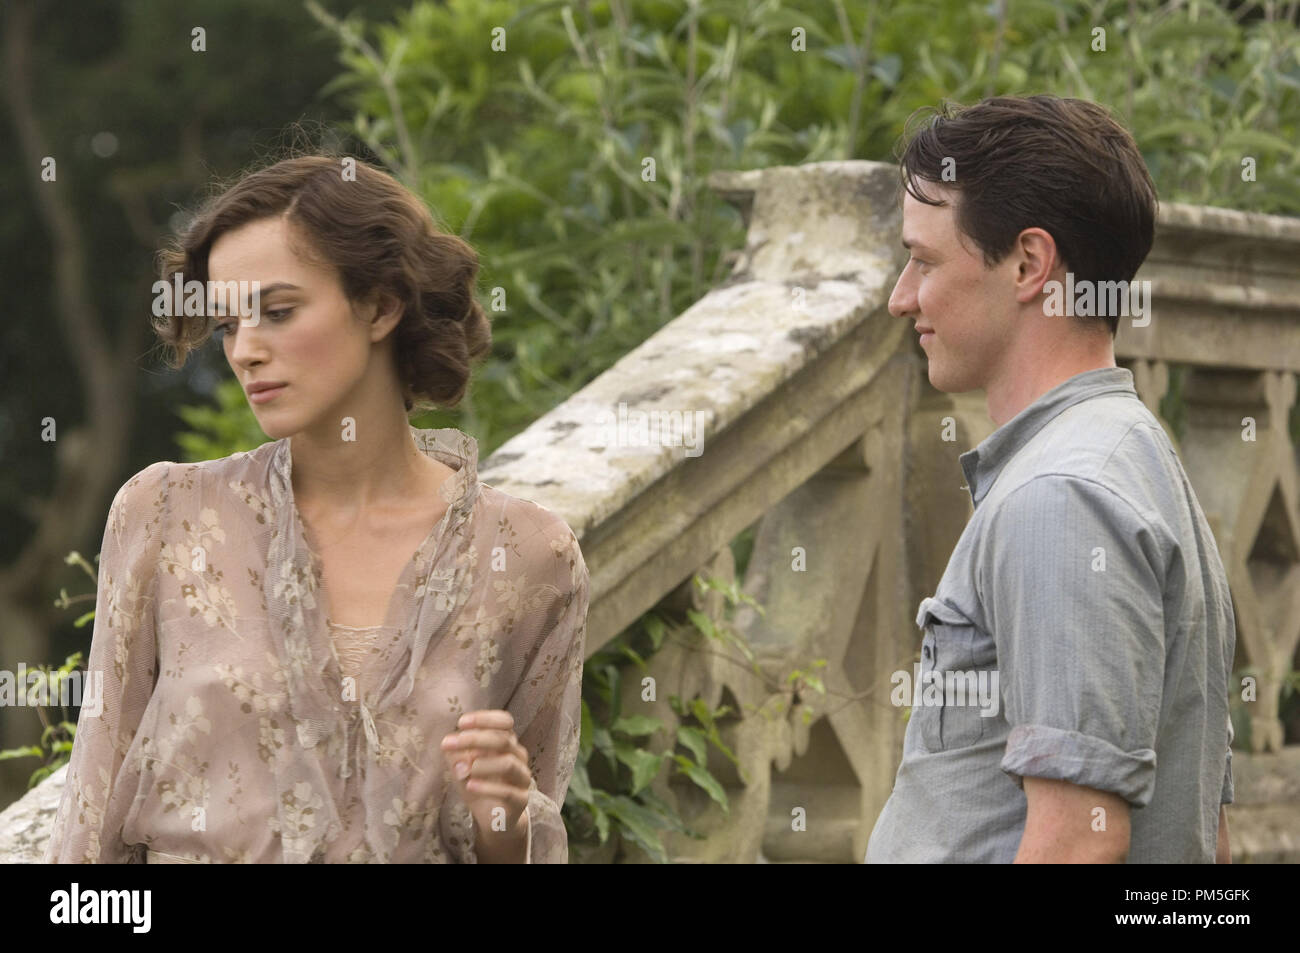 Film Still from 'Atonement' Keira Knightley, James McAvoy © 2007 Focus Features Photo credit: Alex Bailey   File Reference # 30738256THA  For Editorial Use Only -  All Rights Reserved Stock Photo